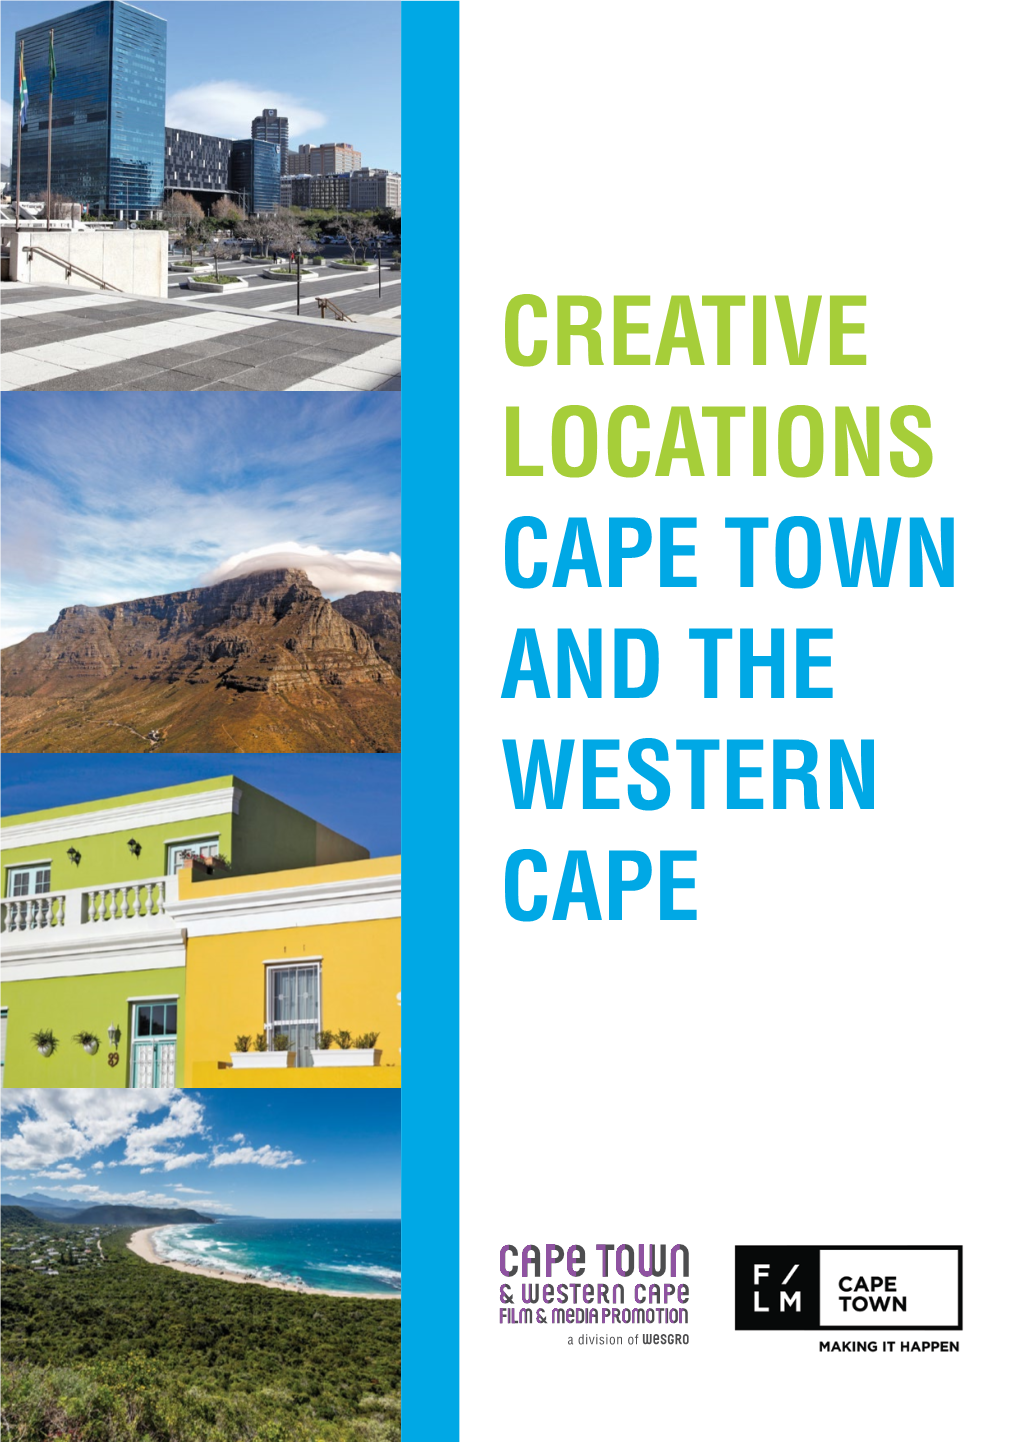 Creative Locations Cape Town and the Western Cape